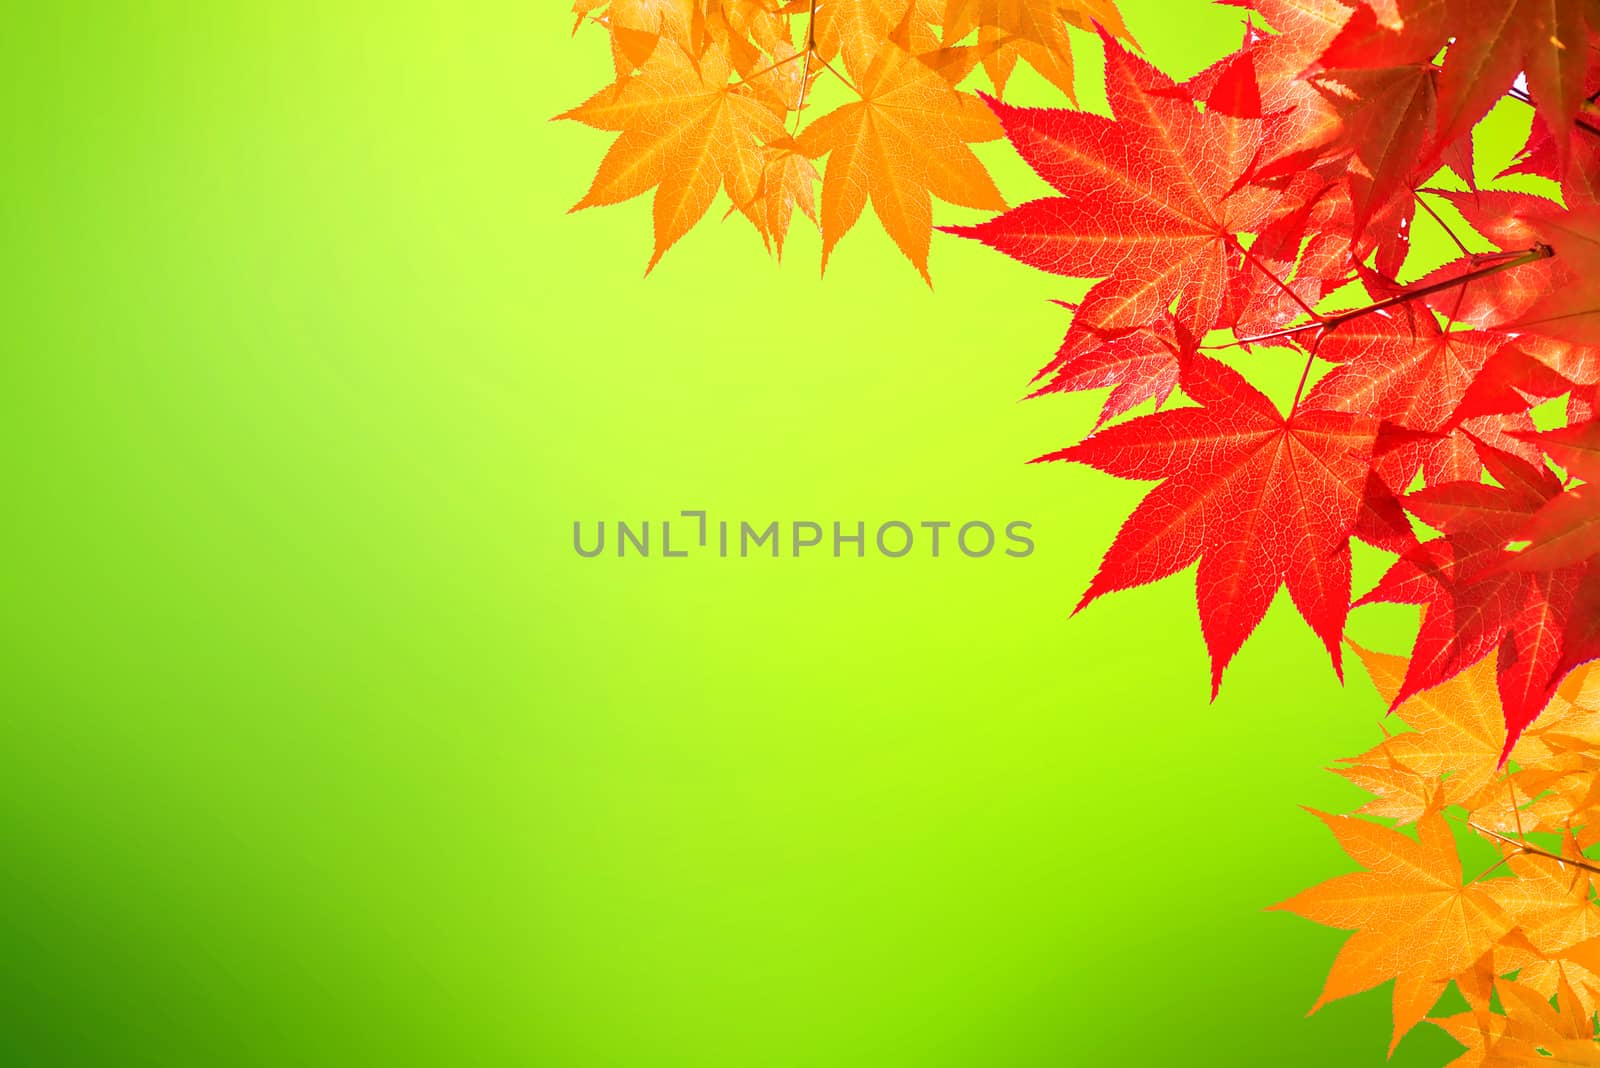 Autumn maple leaves. by gutarphotoghaphy